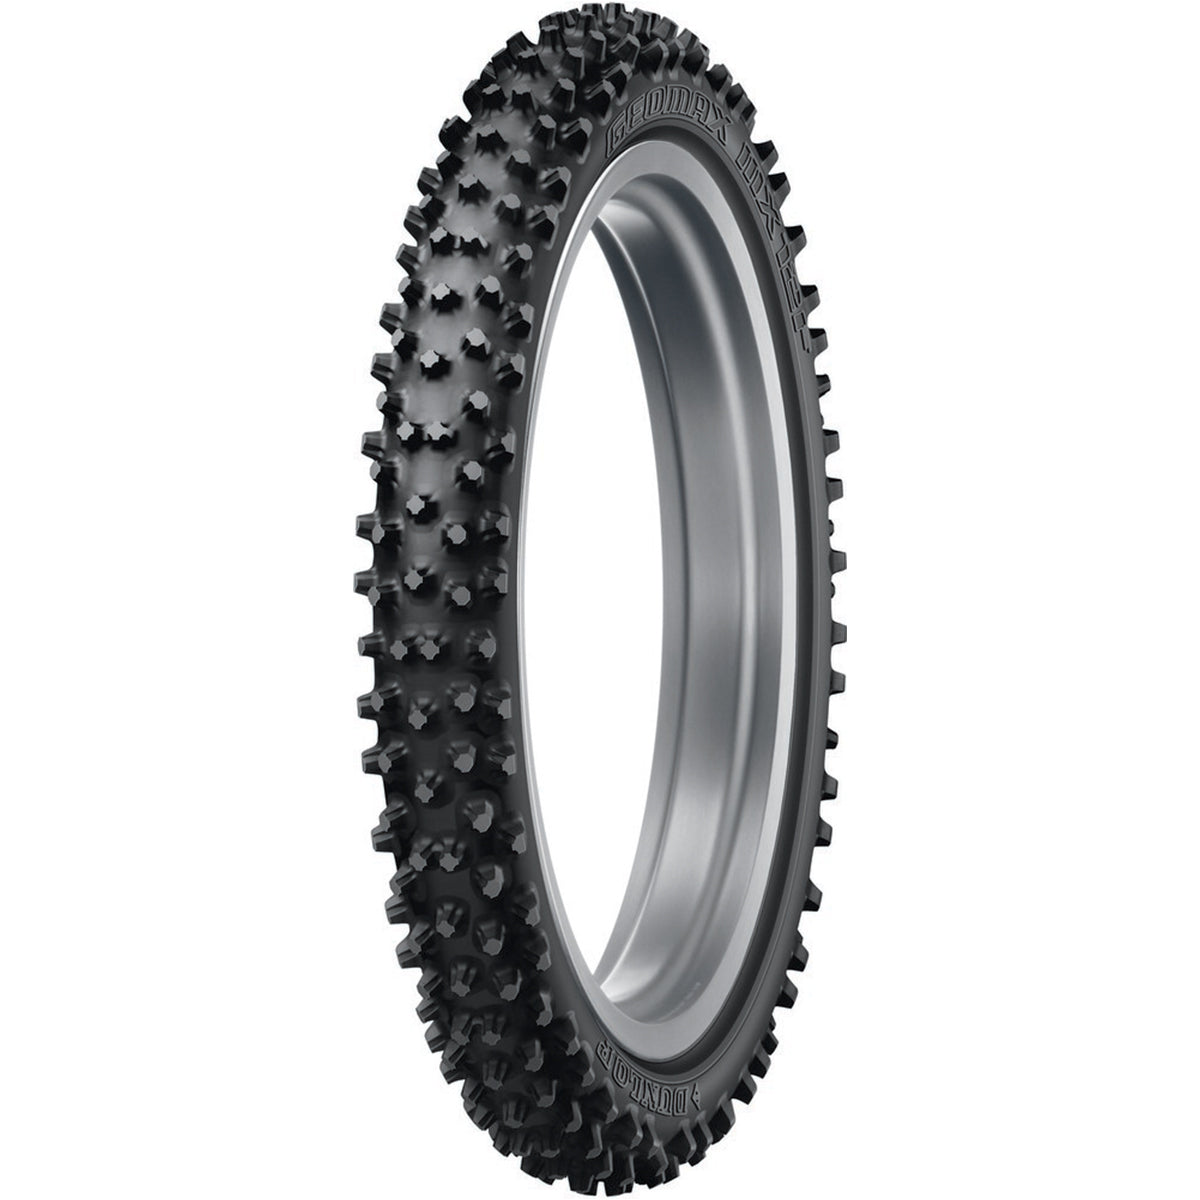 Dunlop Geomax MX12 21" Front Off-Road Tires-0312